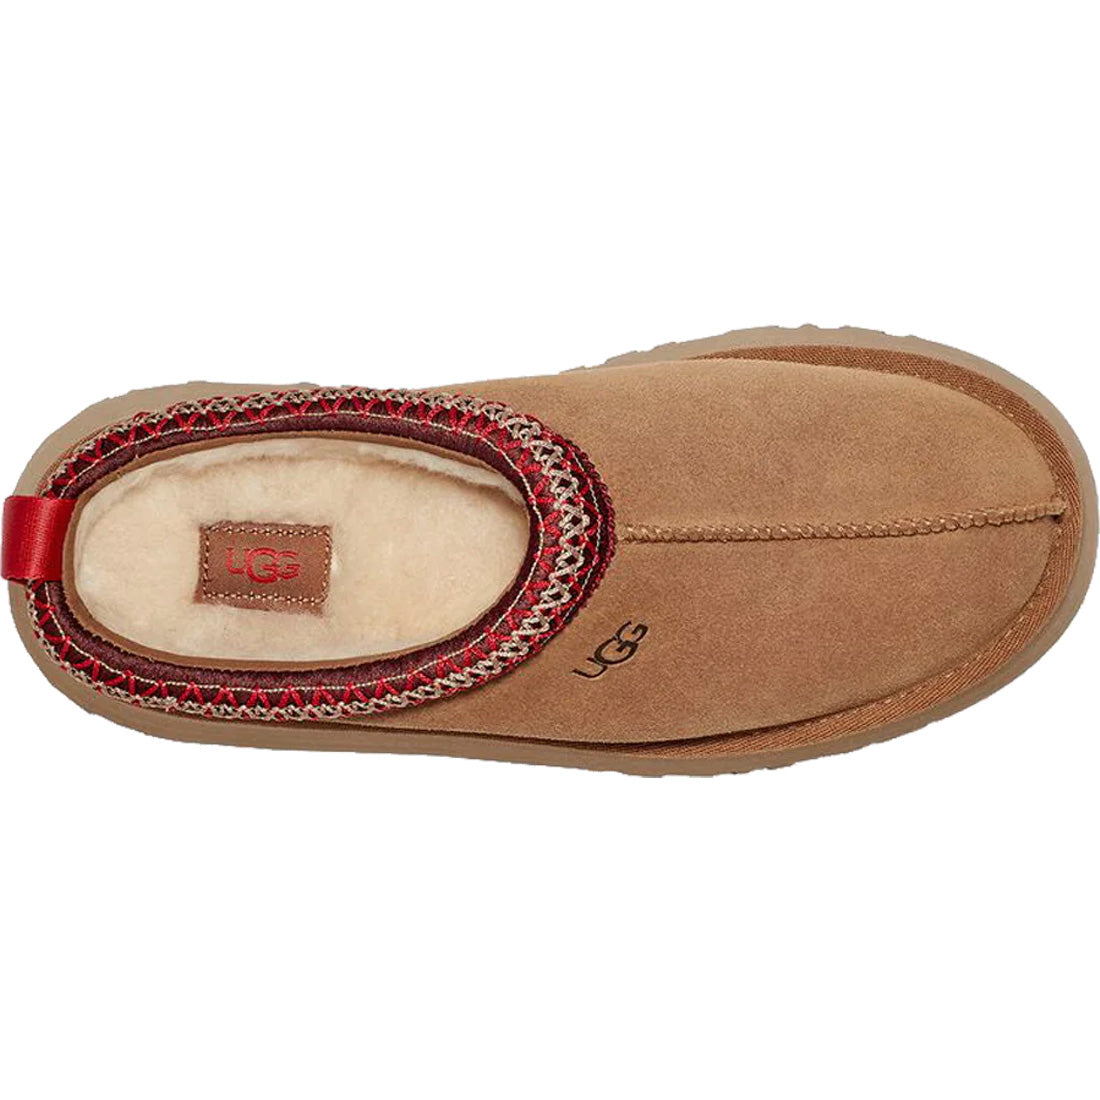 Brown Tazz shearling-lined suede platform slippers, Ugg